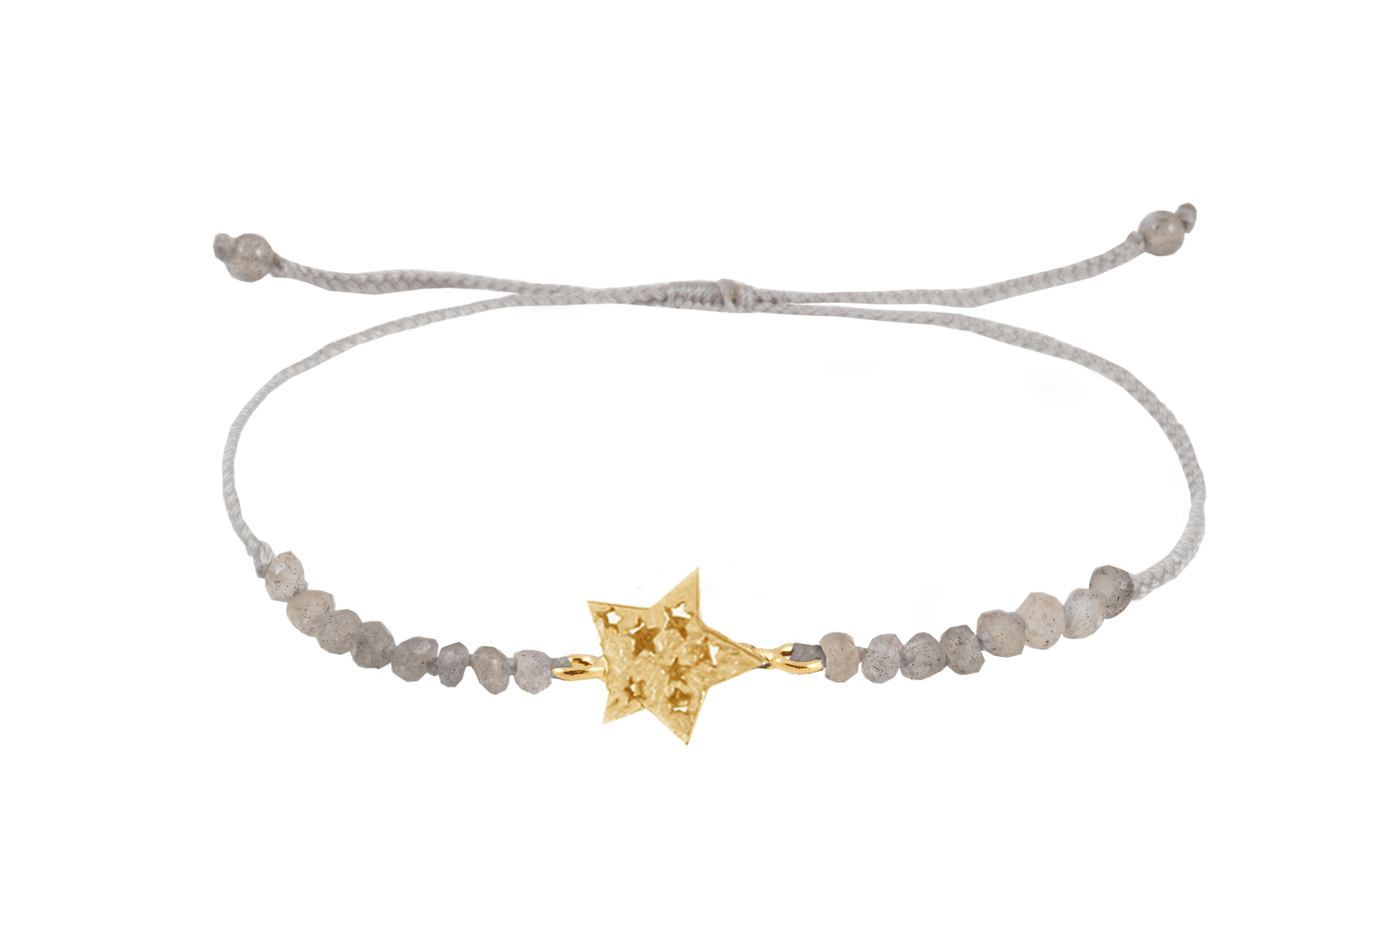 5-pointed star amulet bracelet with beads. Gold plated